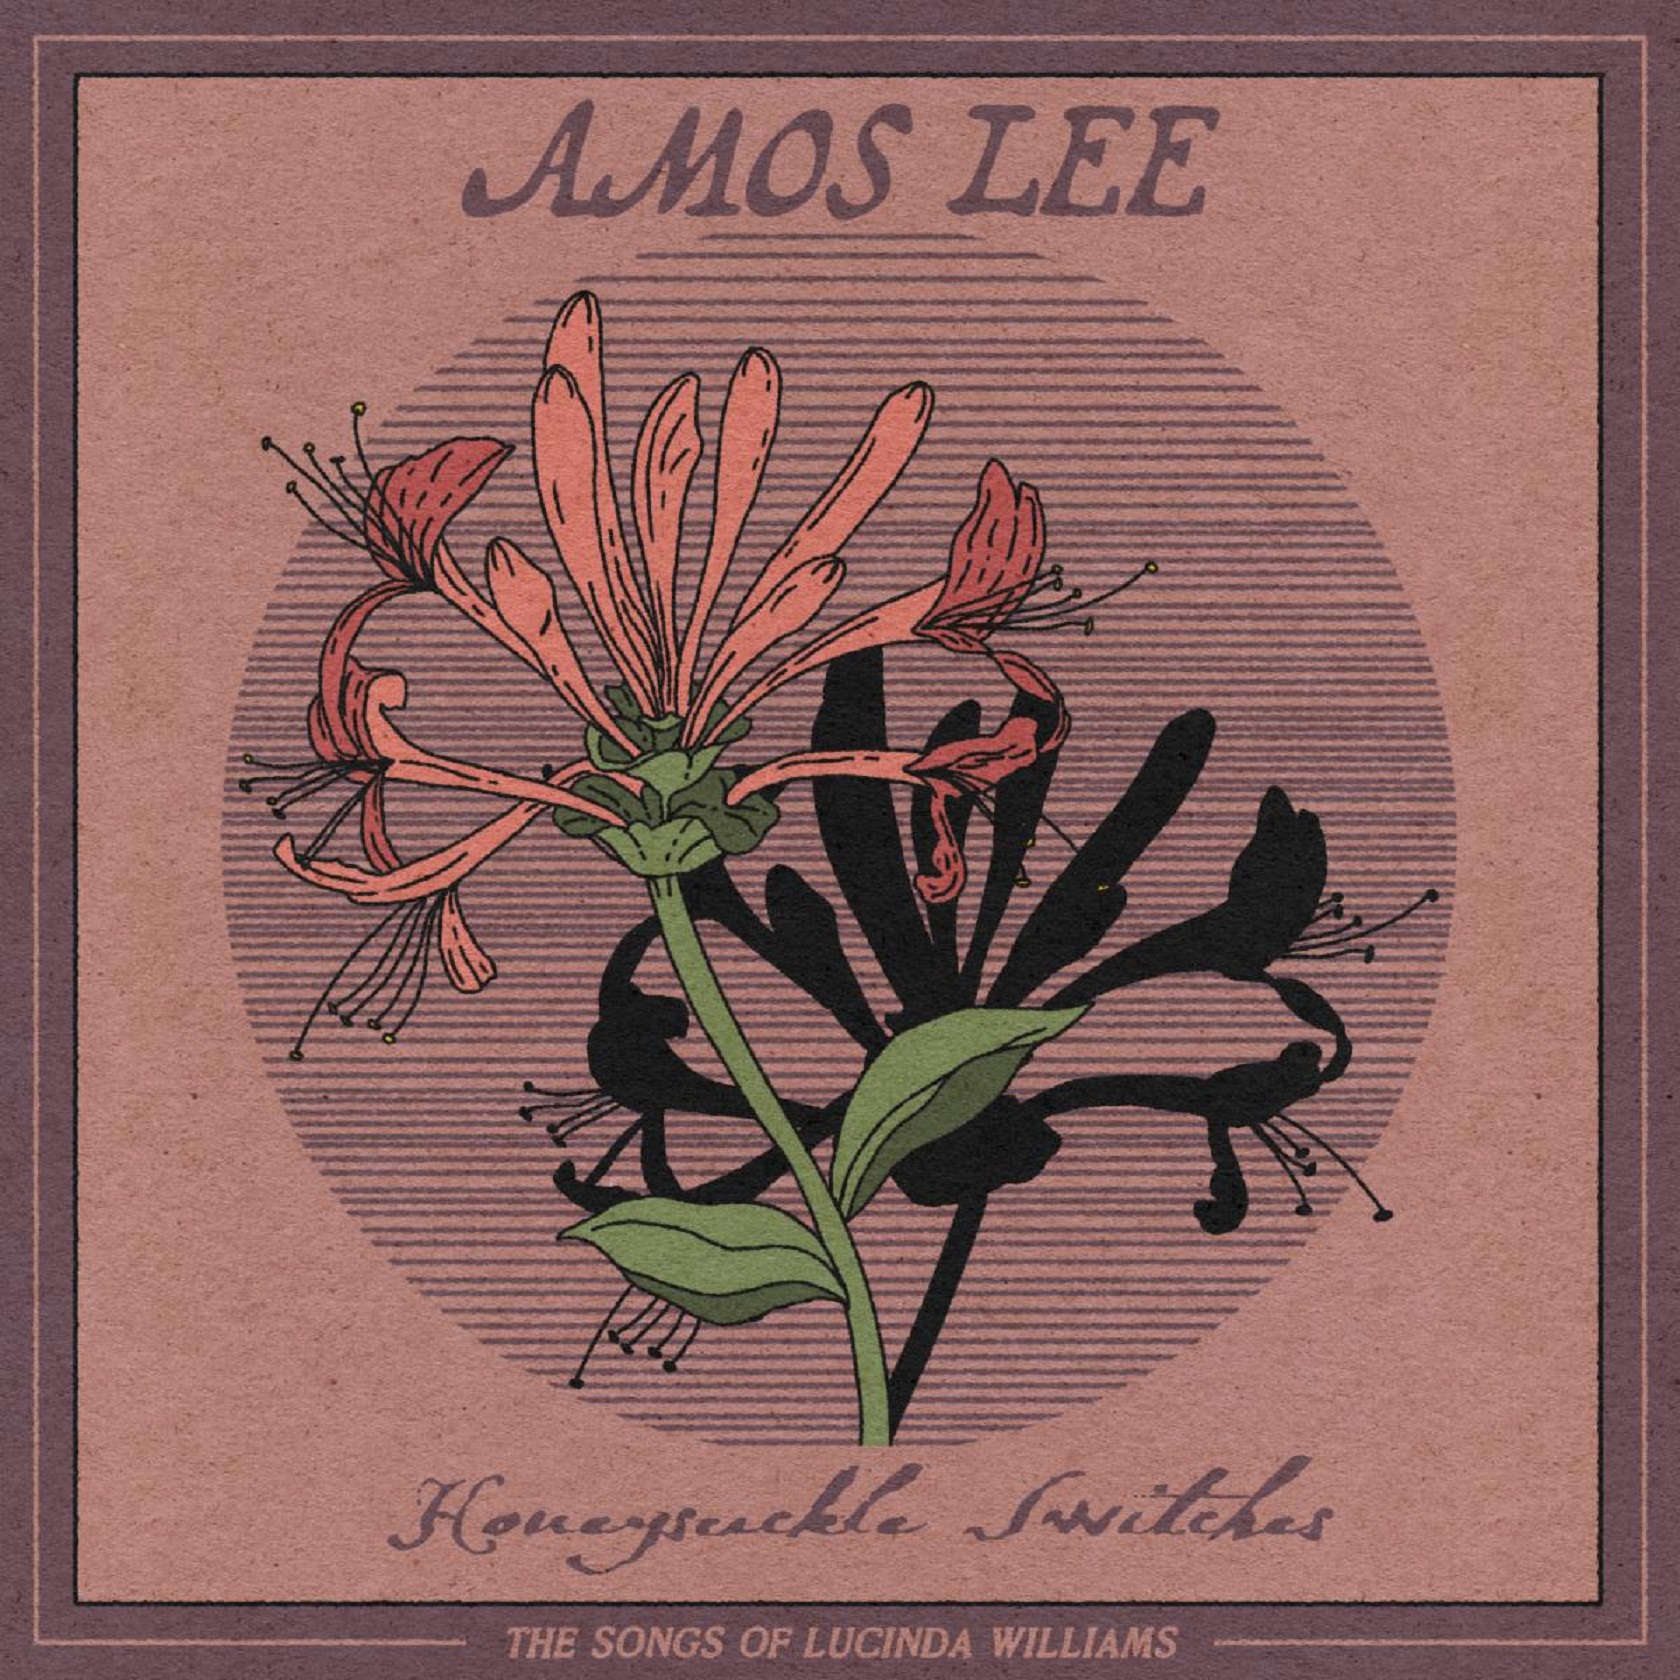   AMOS LEE OFFERS ACOUSTIC RENDITION OF “FRUITS OF MY LABOR” FROM MUSICAL HERO LUCINDA WILLIAMS